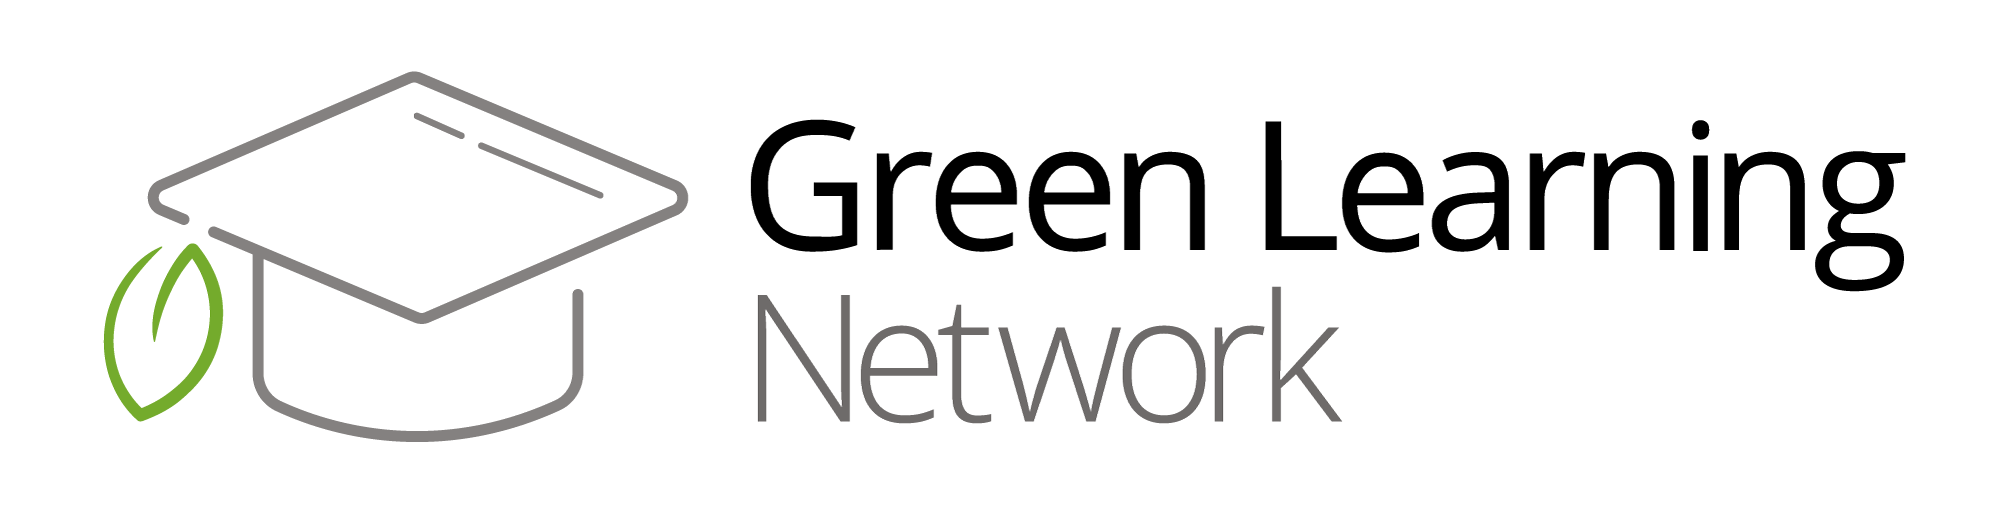 Green Learning Network